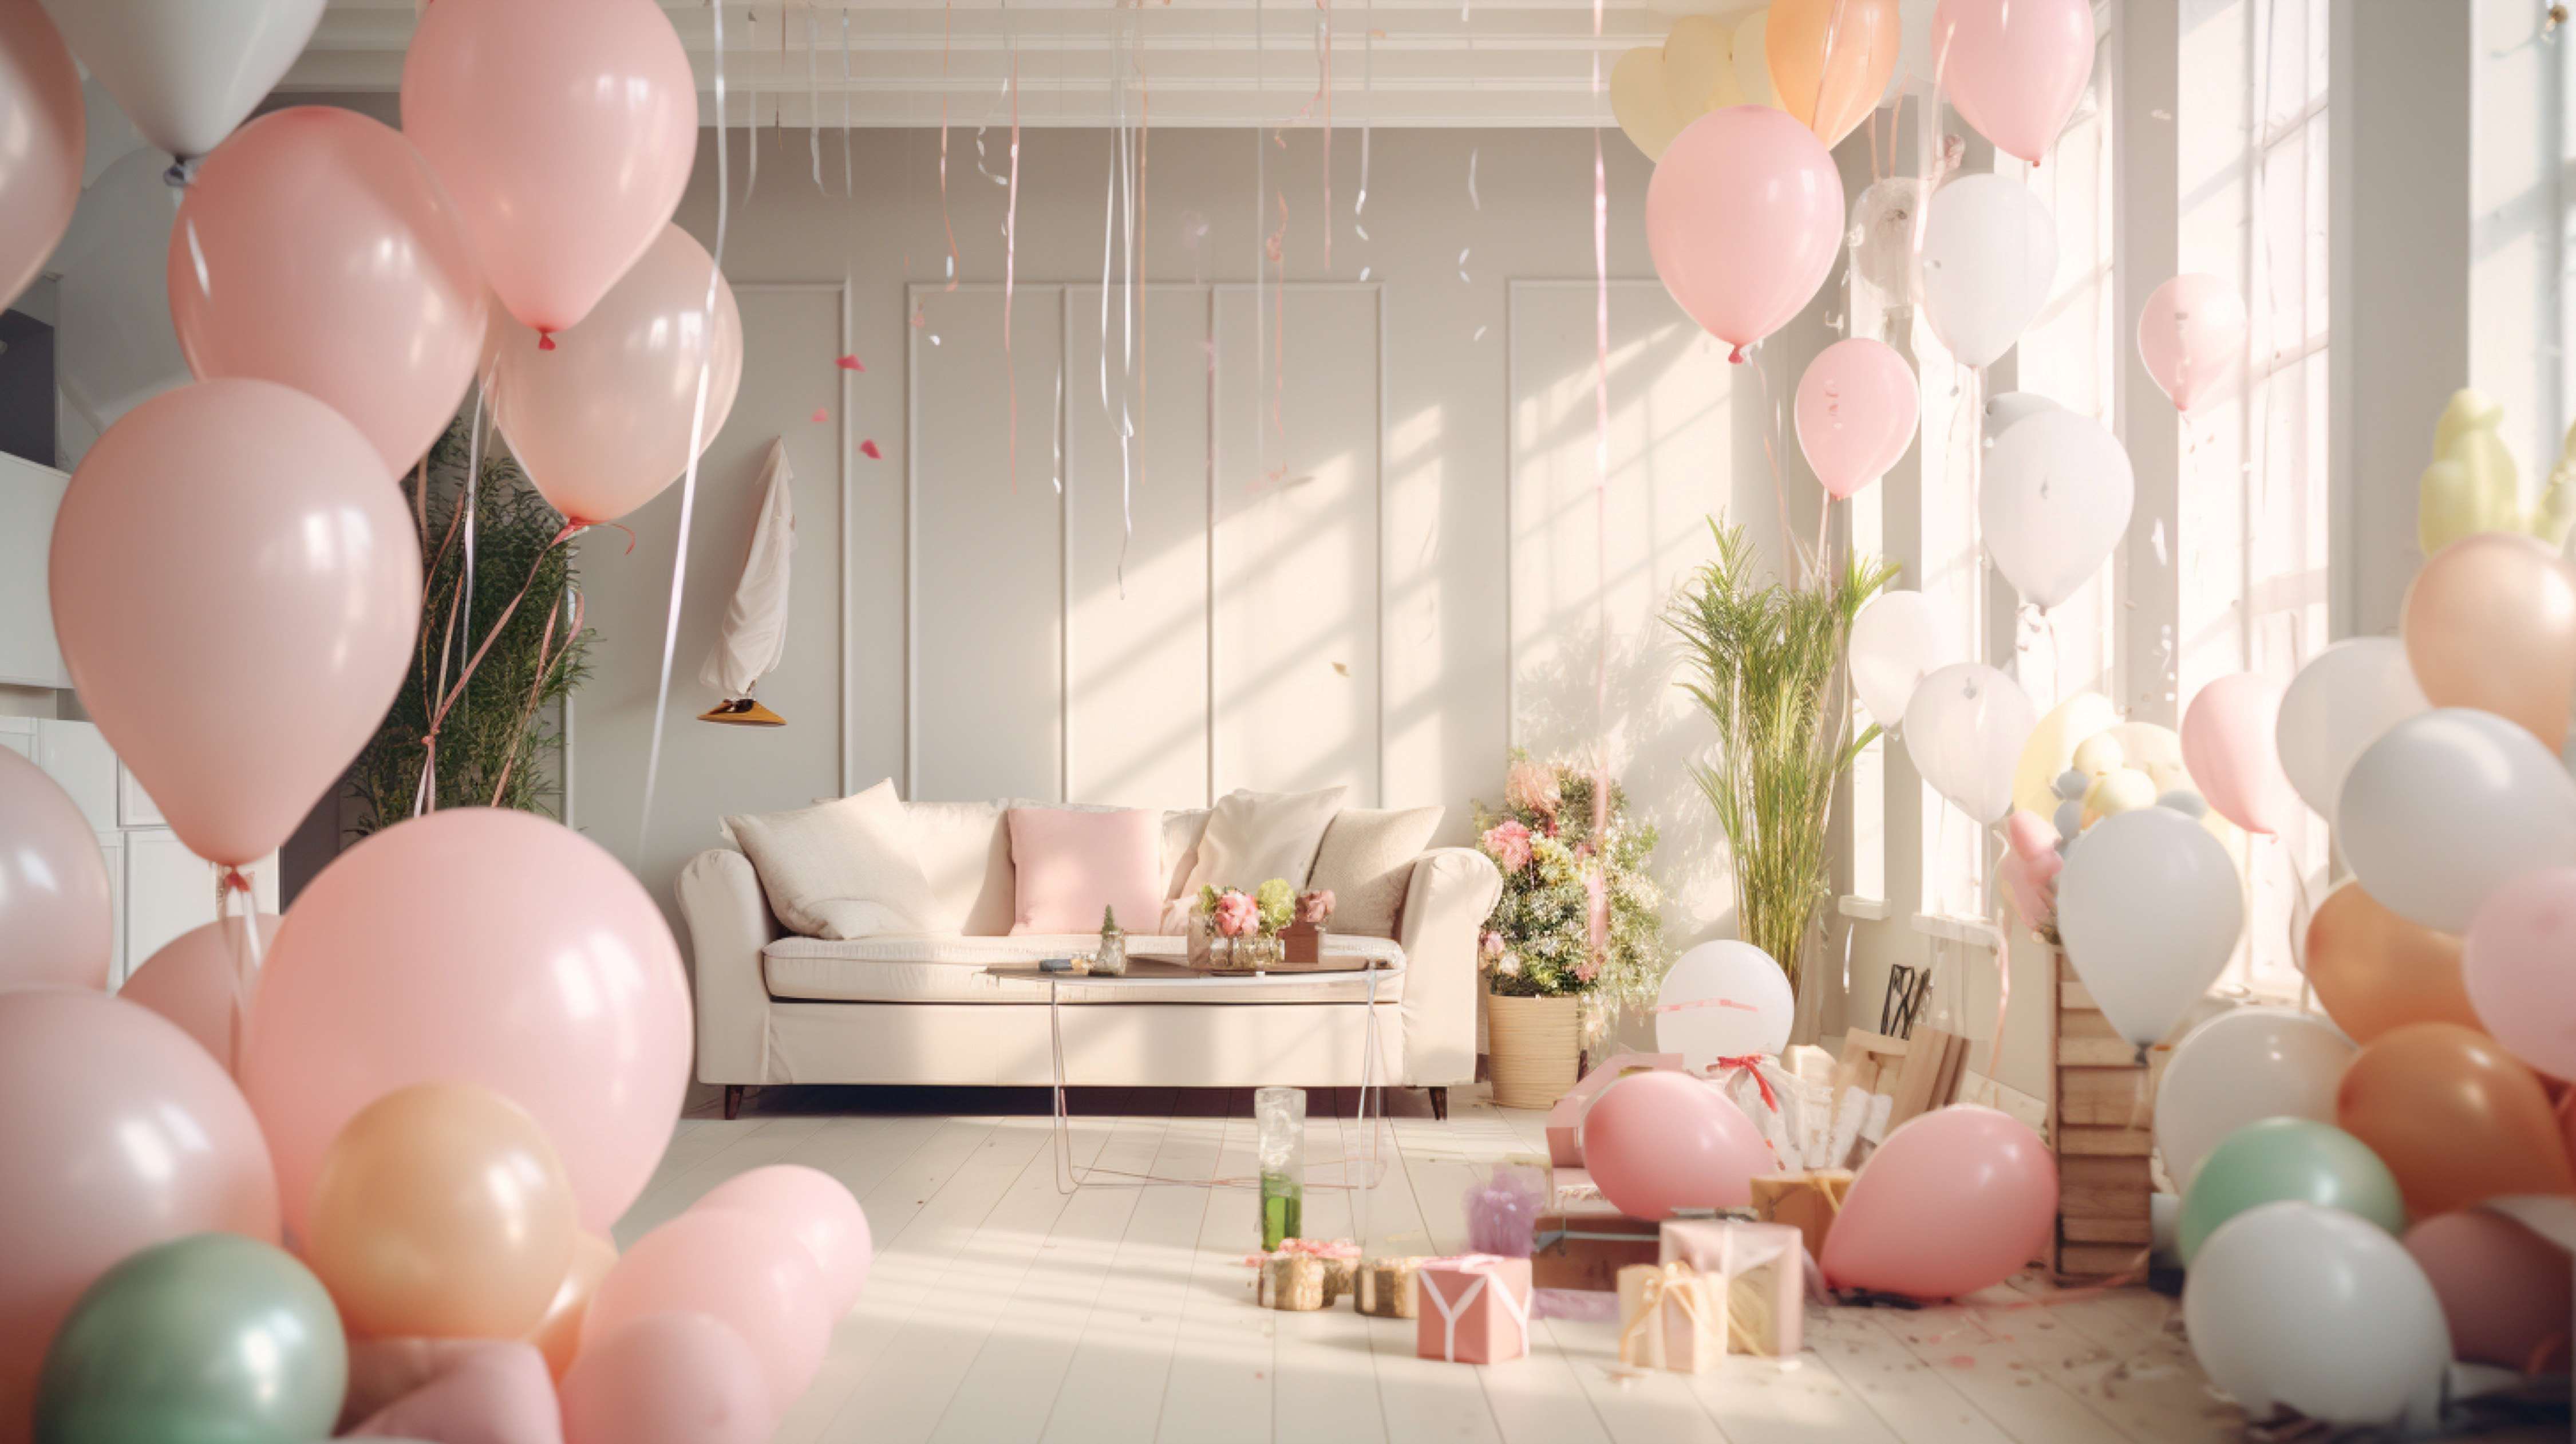 birthday party organiser and decor services